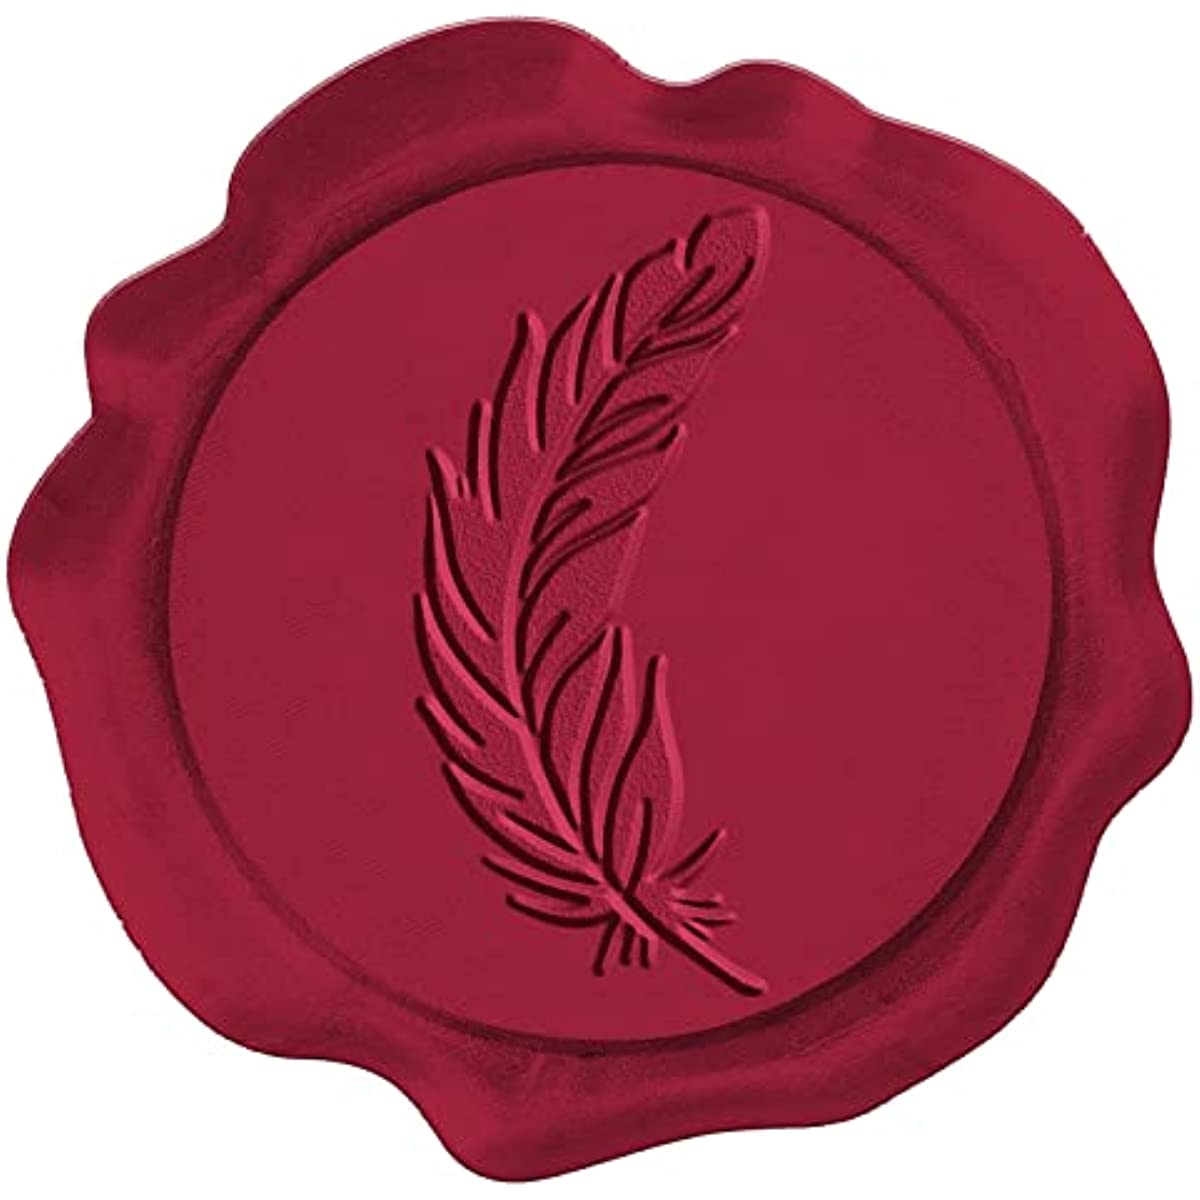 50 pcs Red Feather Wax Stamp Stickers Quill Pen Envelope Seal Stickers  1.21in Self Adhesive Sealing Wax Stamp Feather Stickers for Wedding  Invitation Cards Gift Wrapping Scrapbooking 